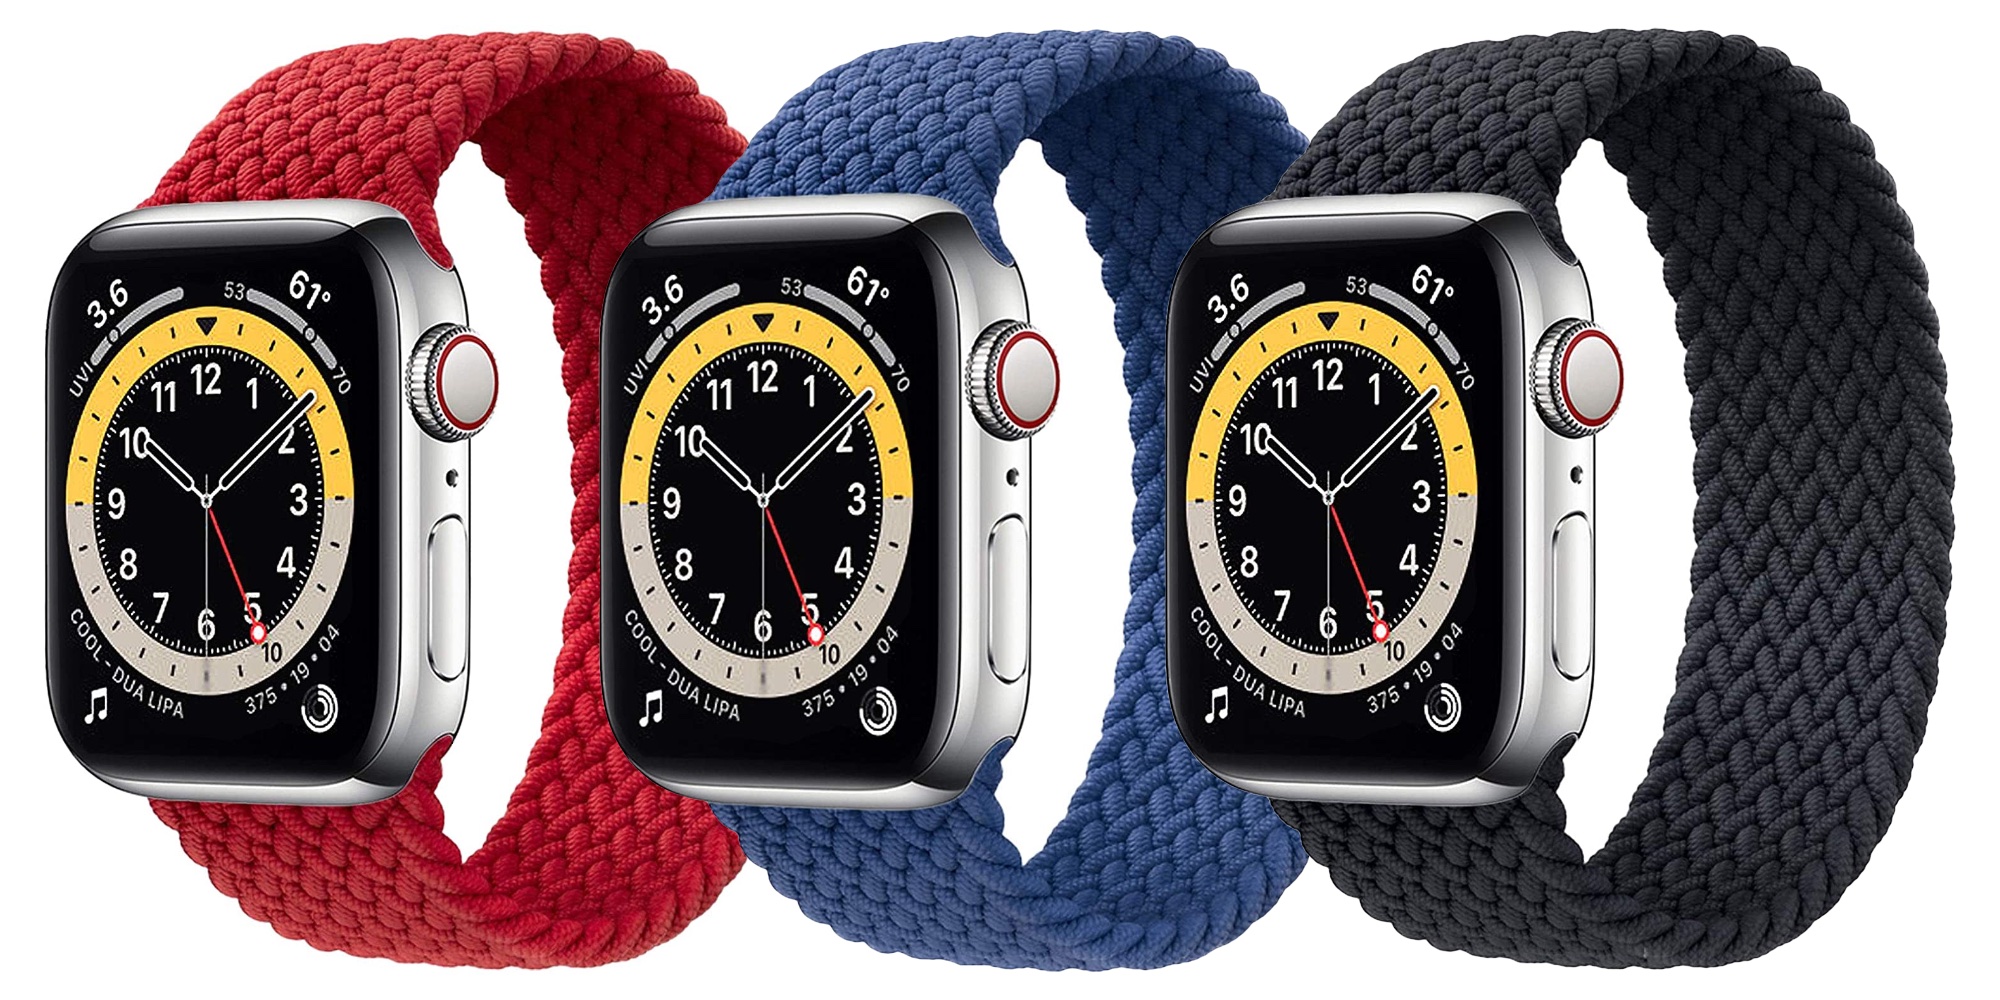 Pair Your Apple Watch With This Braided Solo Loop Band For 13 Save 35